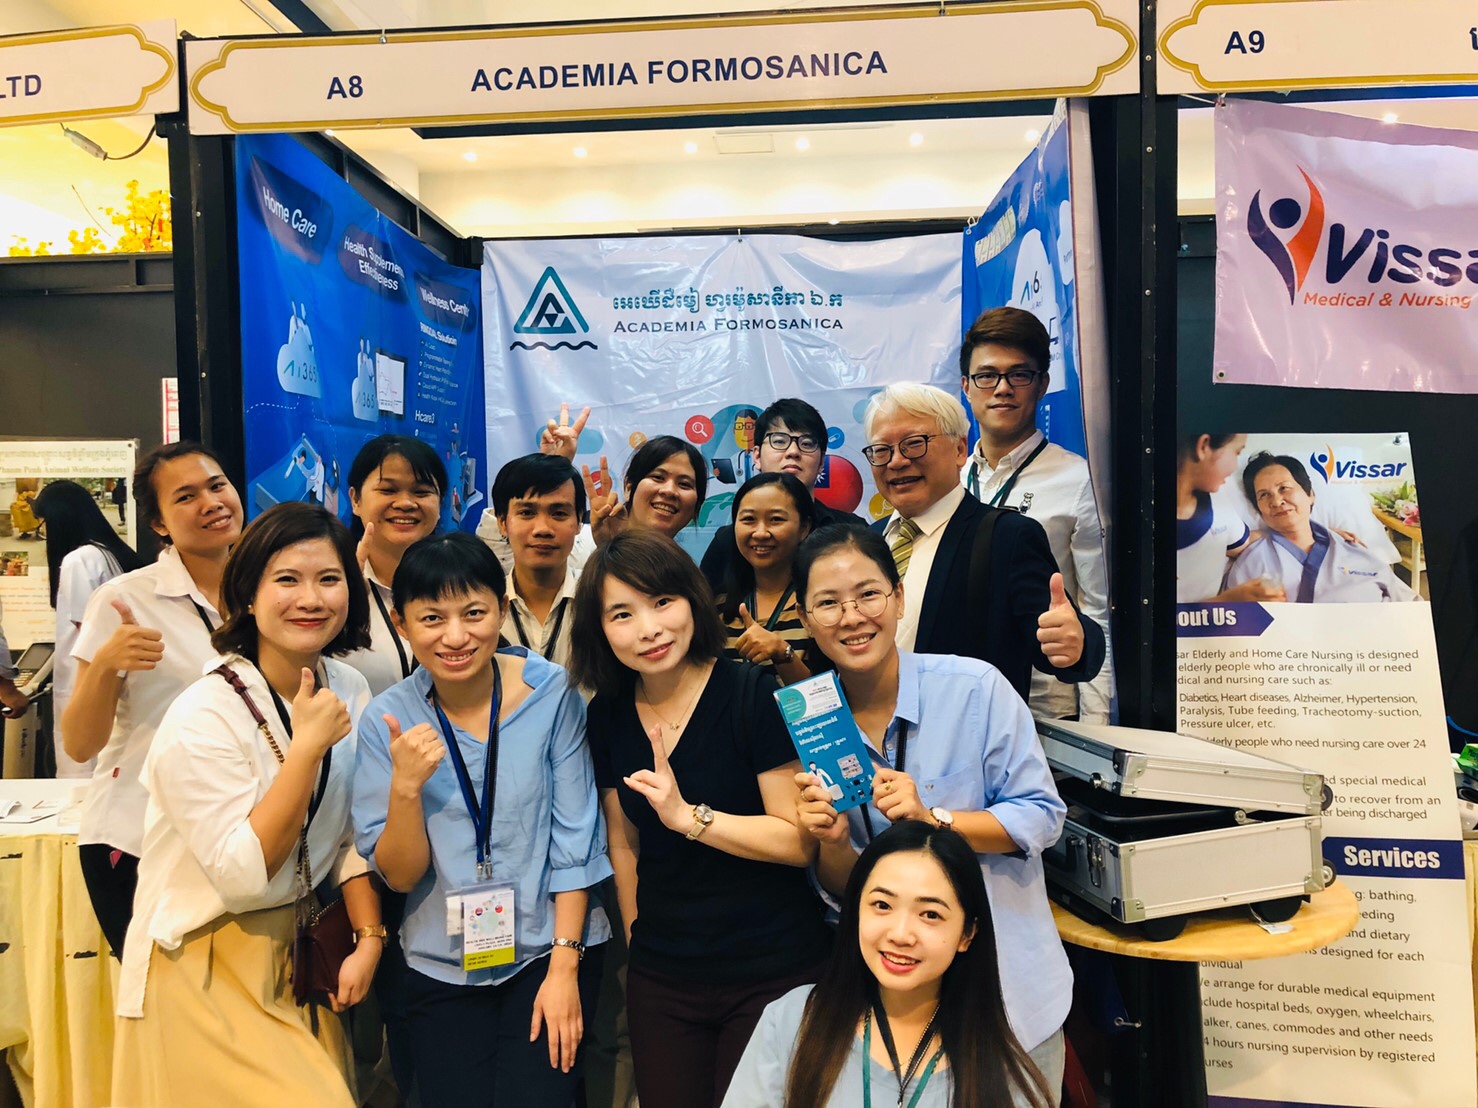 Academia Formosanica team participated in a medical exhibition to promote Taiwan's experience